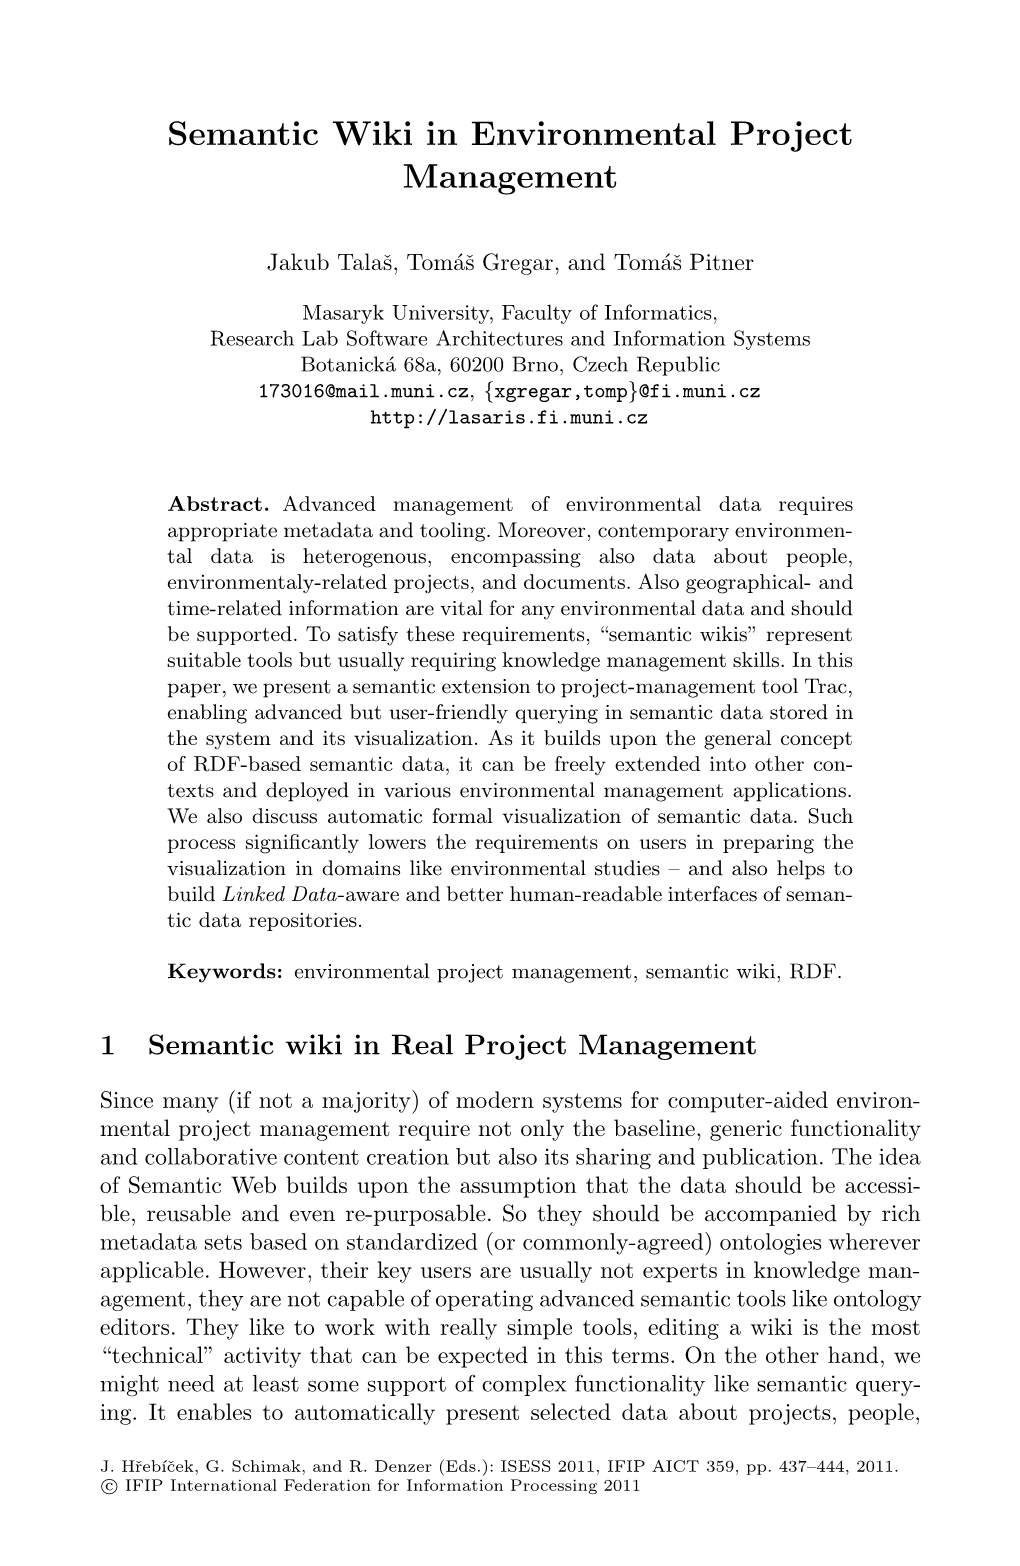 Semantic Wiki in Environmental Project Management